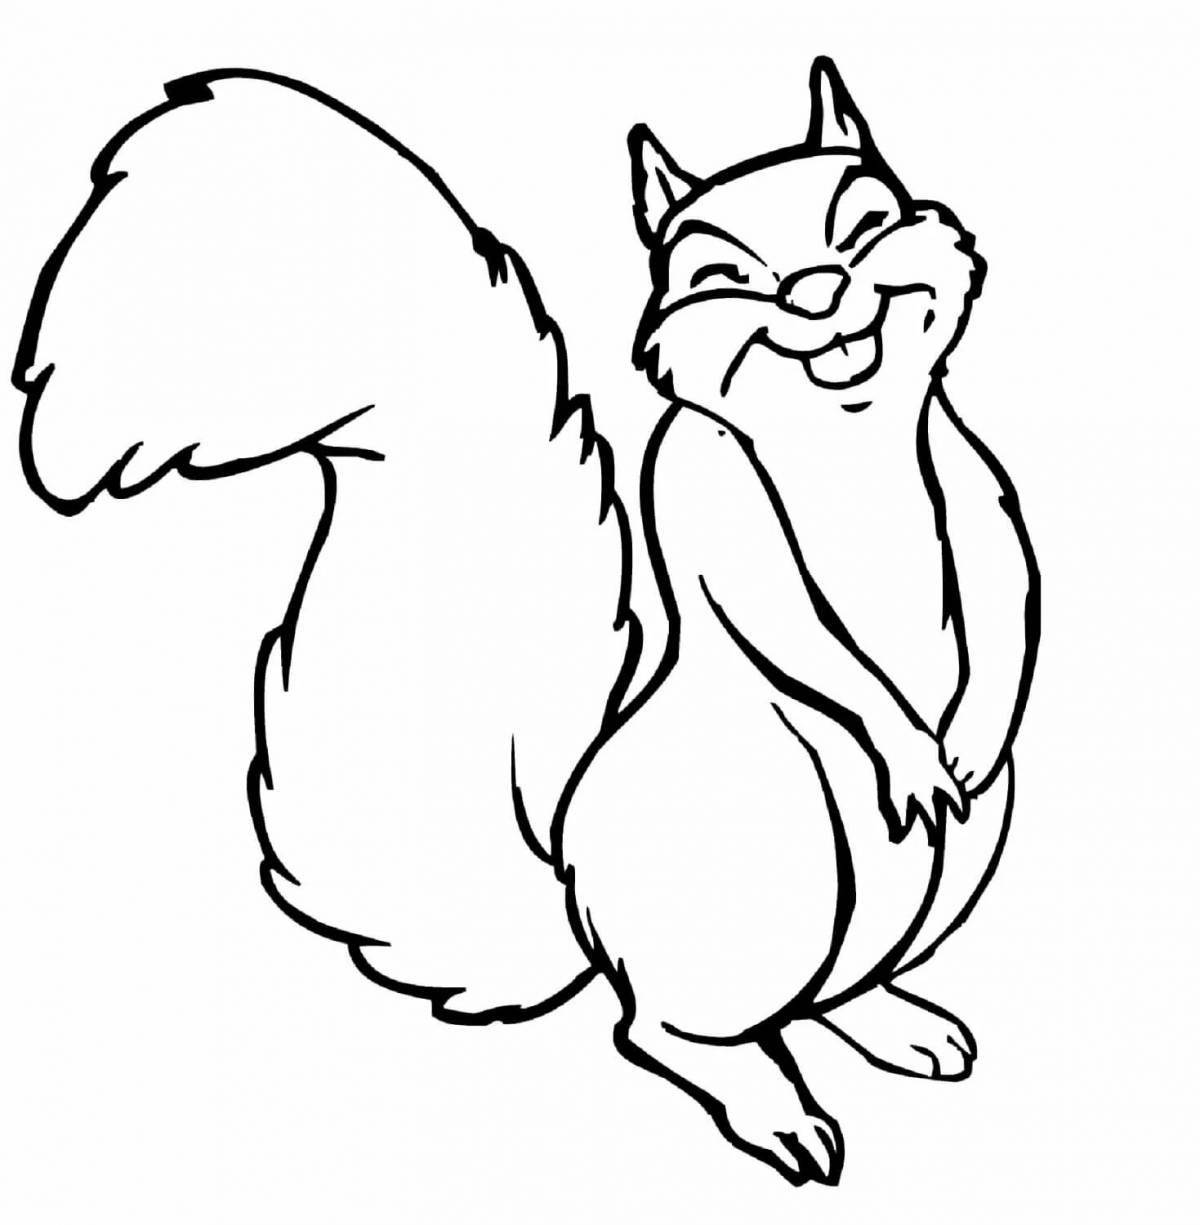 Drawing of a mischievous squirrel